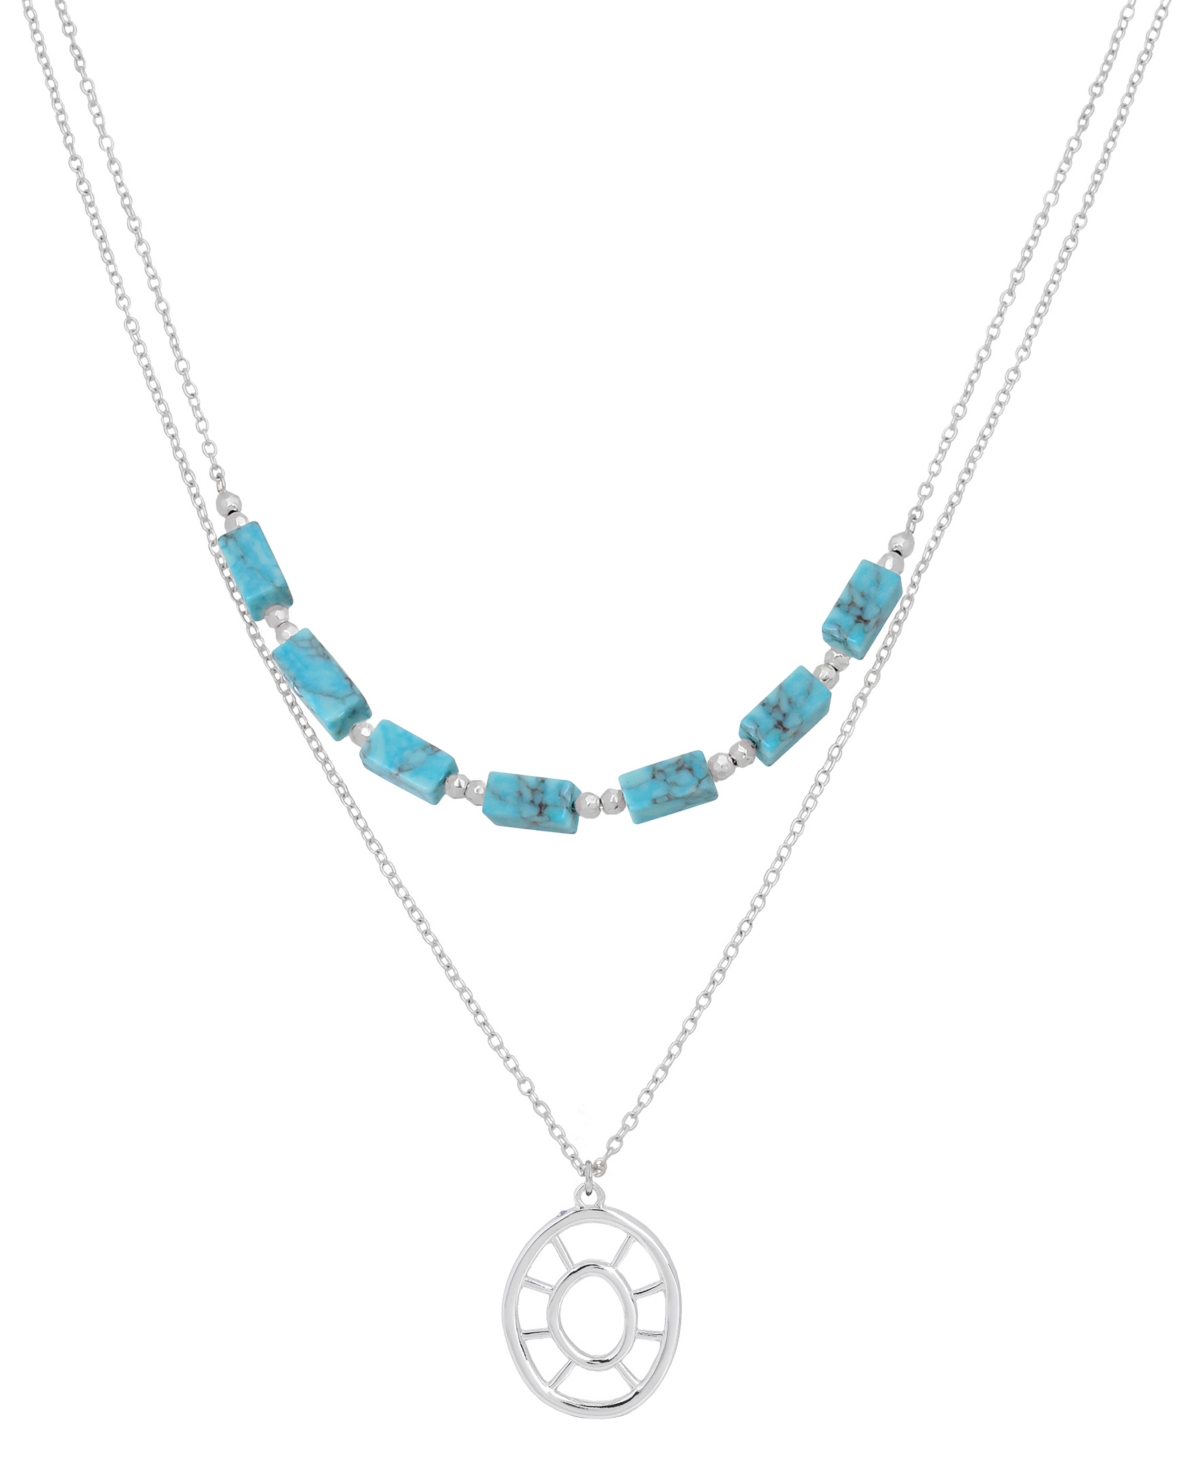 Turquoise Bead Layered Necklace - Turquoise